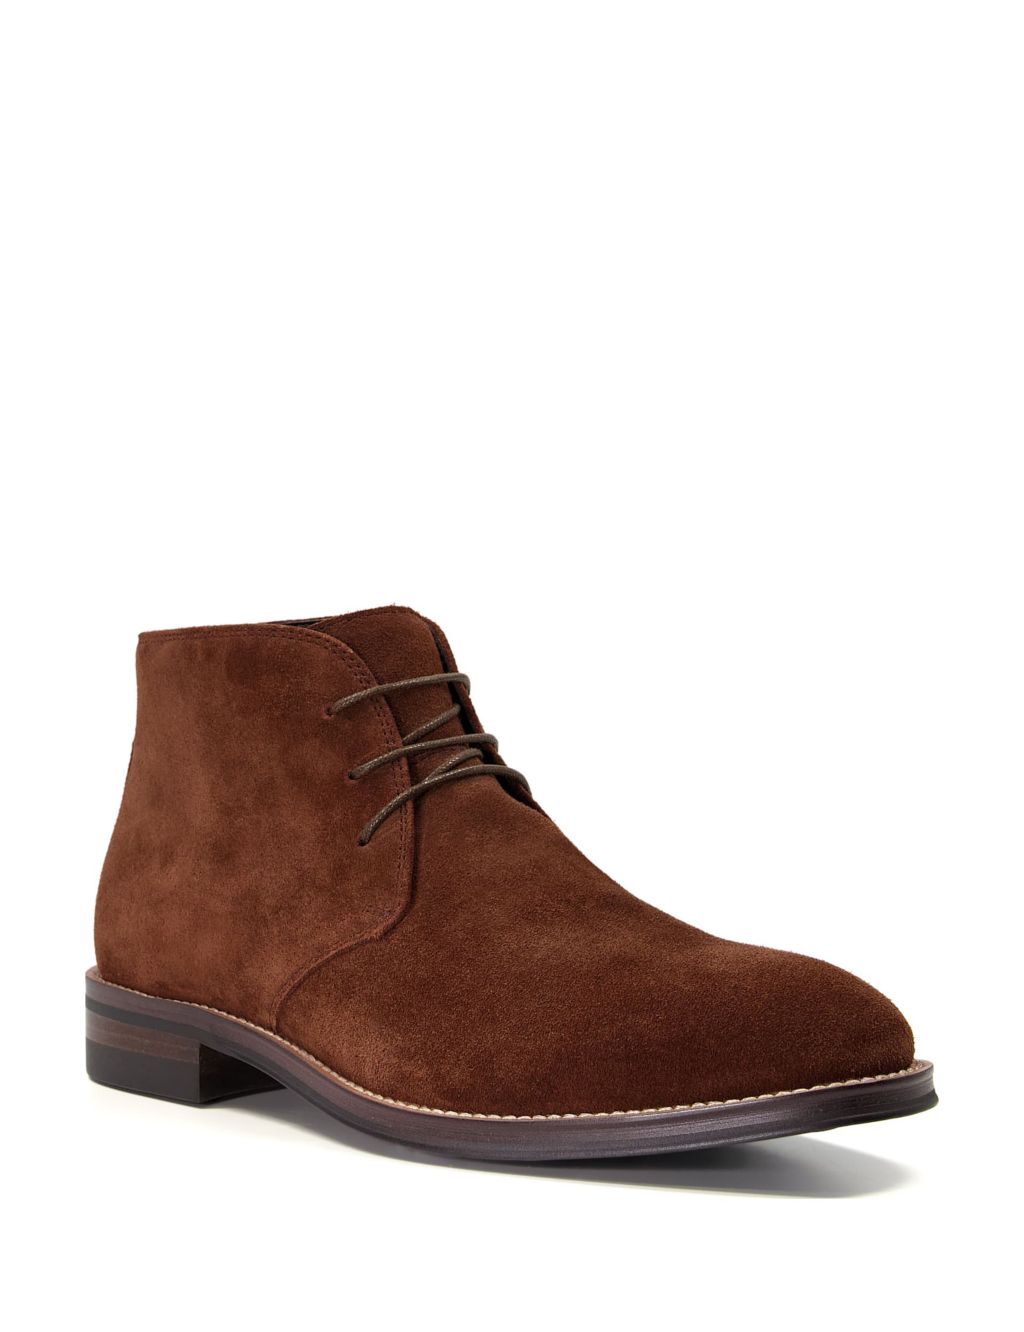 Suede Chukka Boots image 2